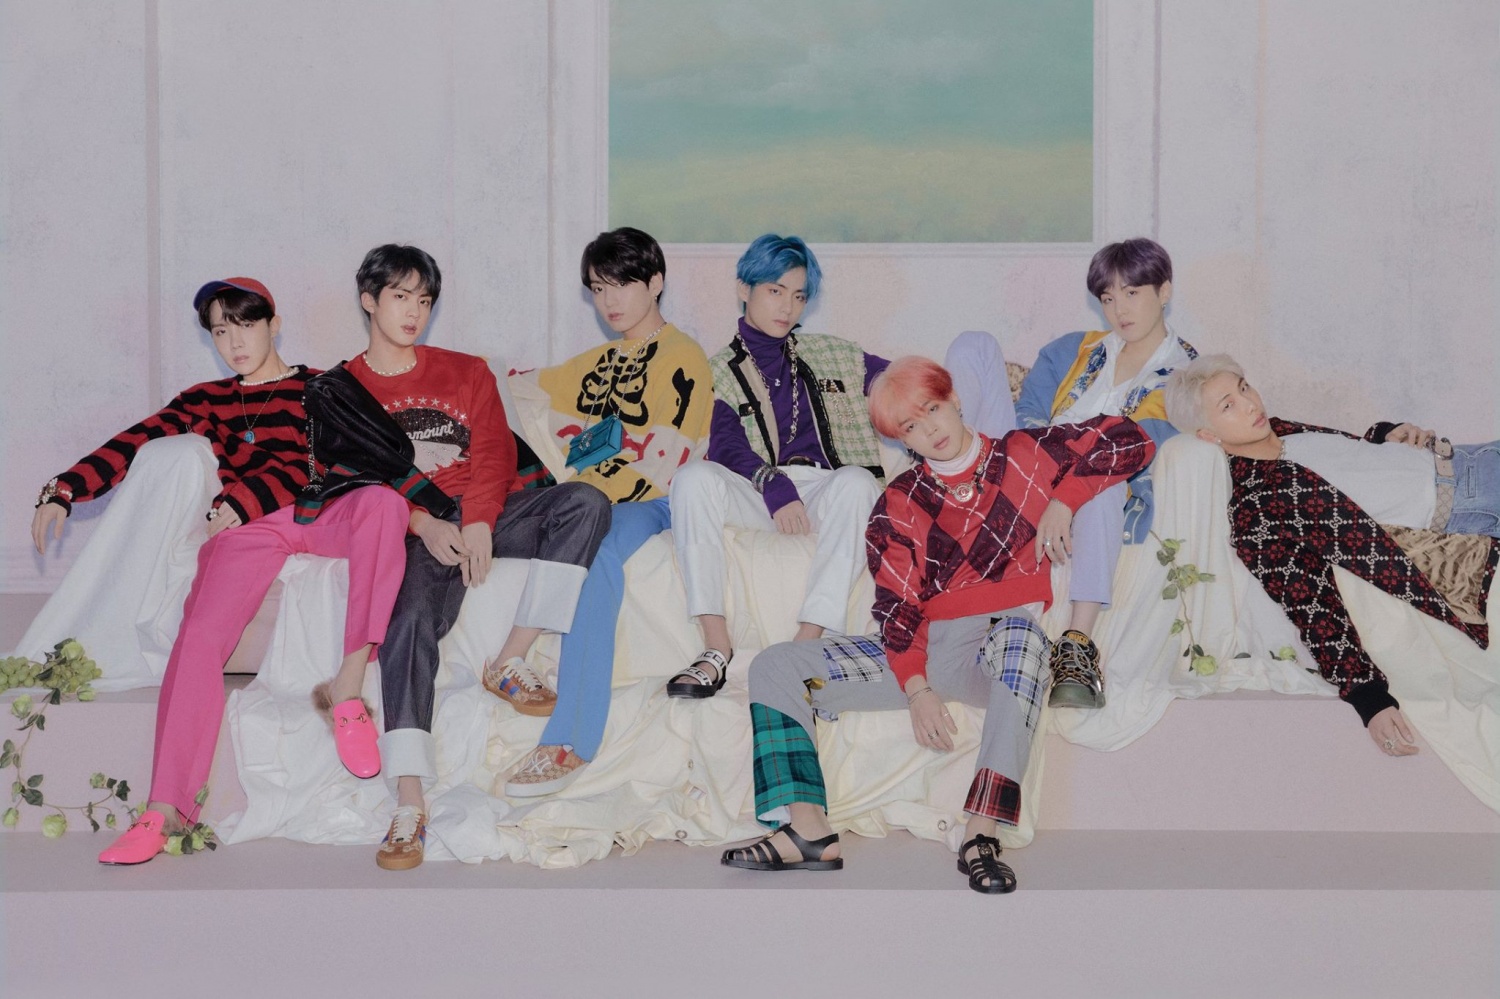 BTS 'MAP OF THE SOUL: PERSONA' recorded the highest sales volume in Gaon Chart